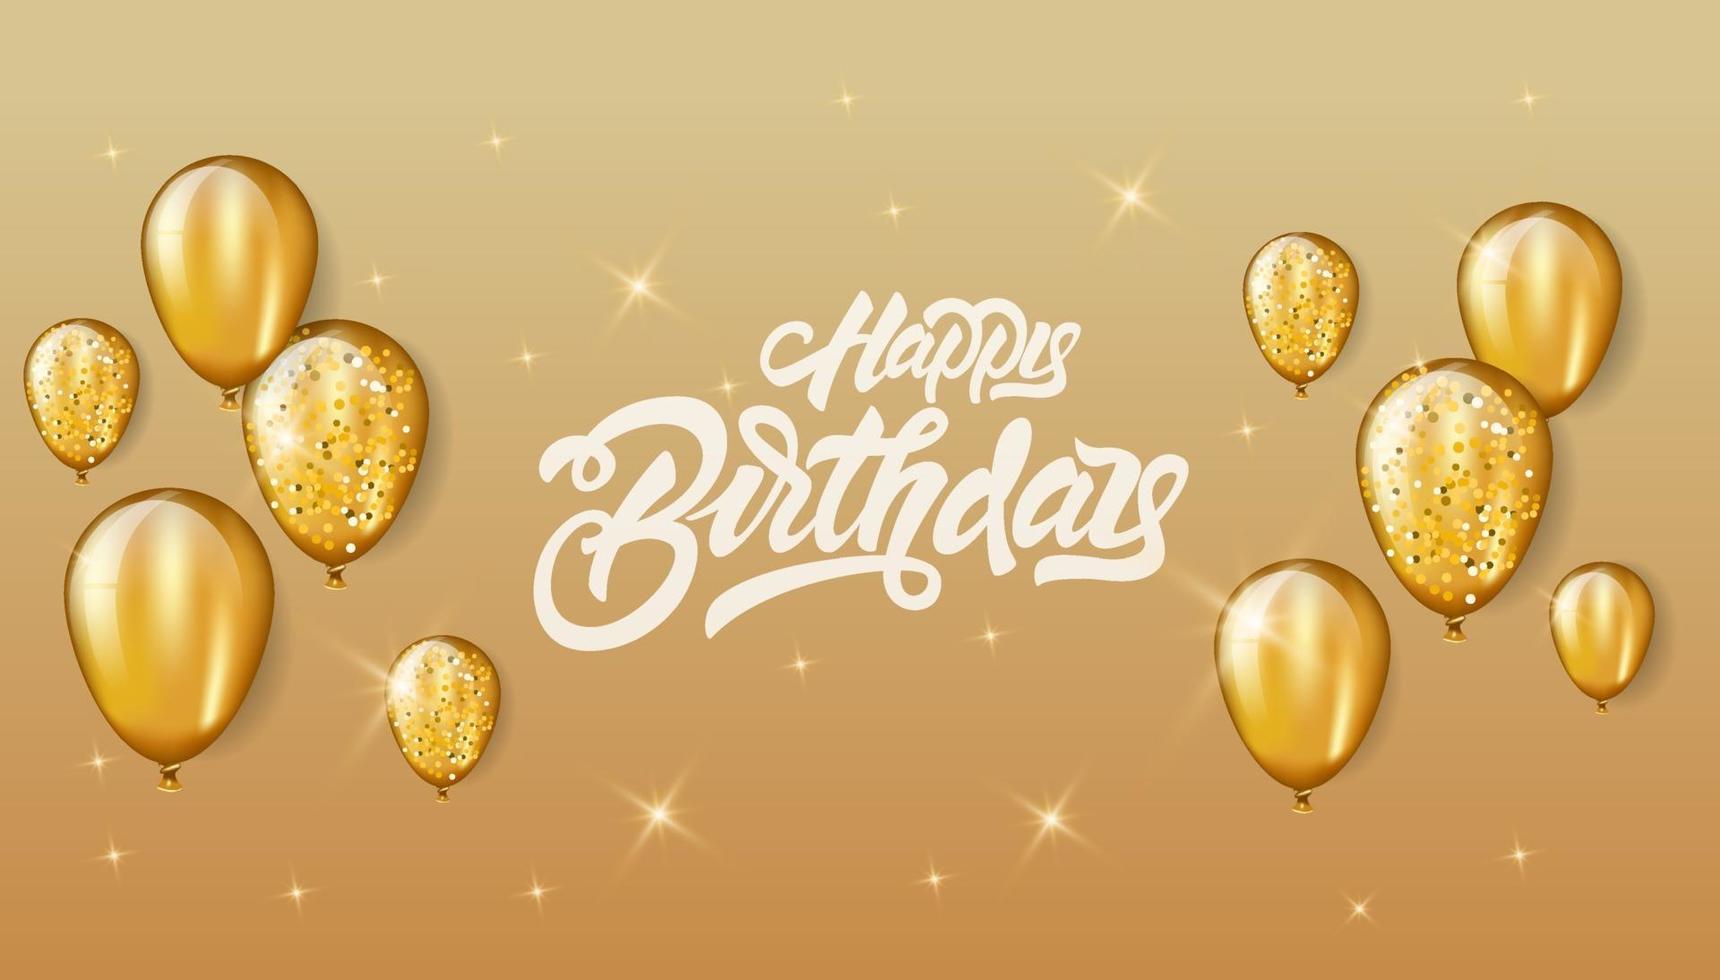 Happy Birthday with lettering celebration design for greeting card, poster or banner with balloon, confetti and gradient. Glitter gold balloons background. vector